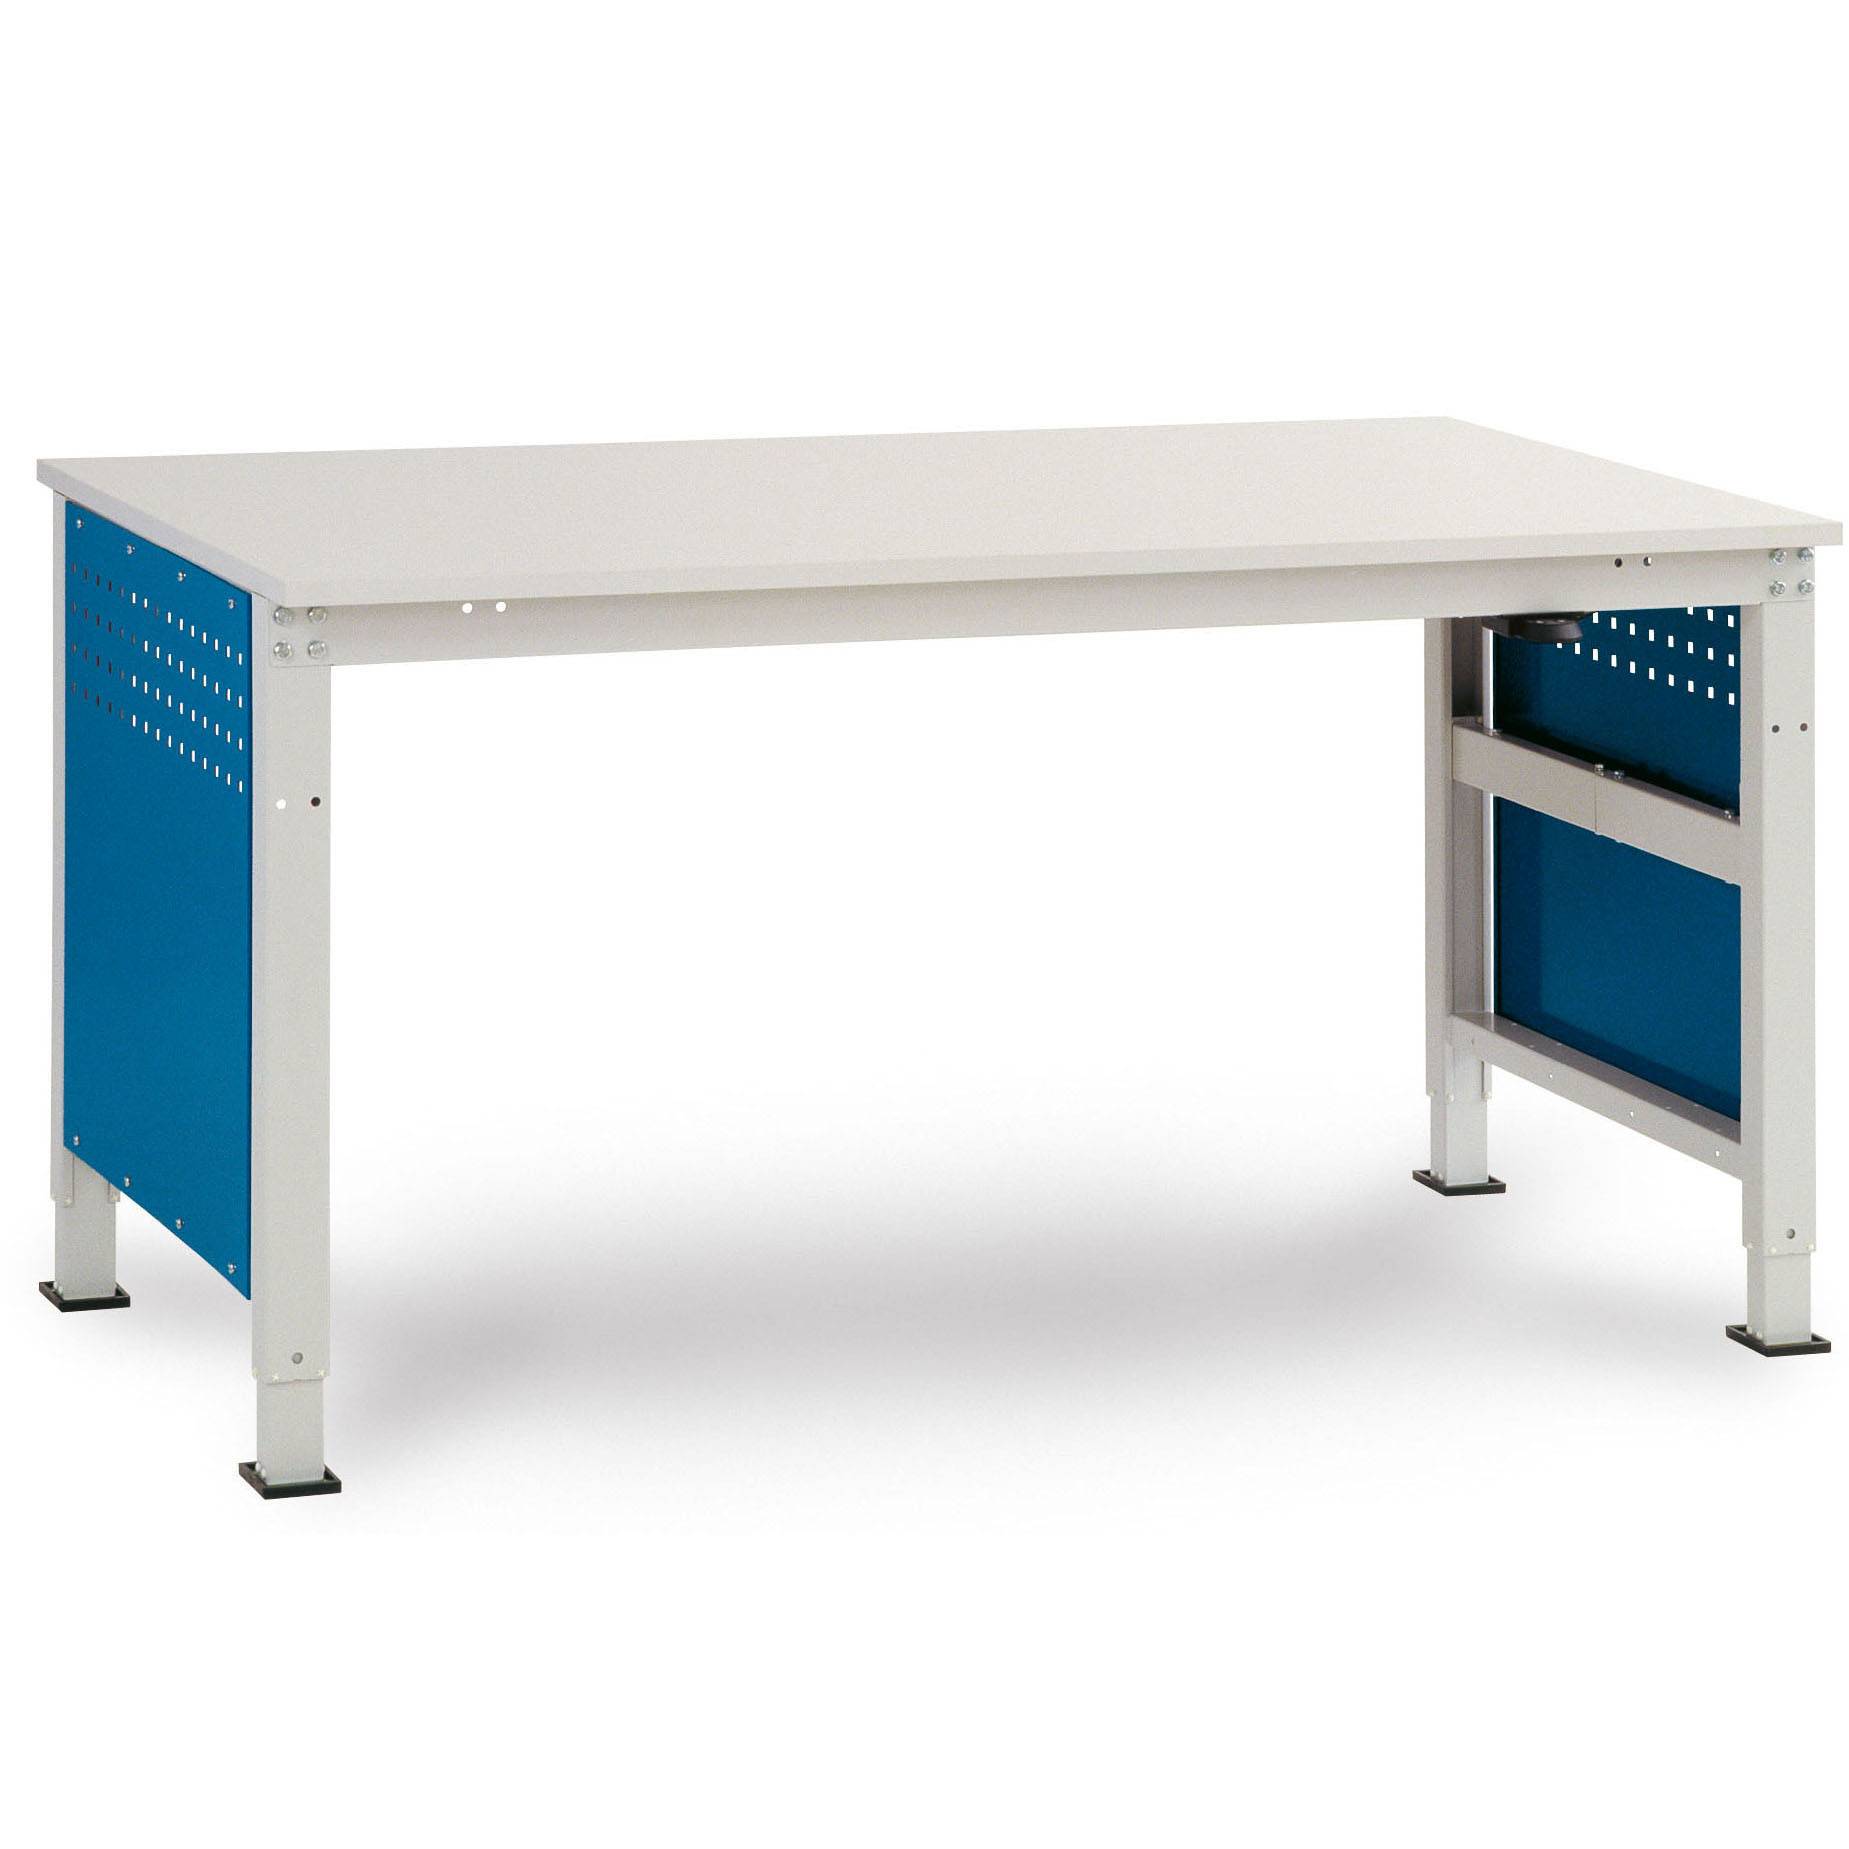 Manuflex  Complete housing 300 for UNIDESK-table, with 2  drawers, 1 x 100, 1 x 200 Body: 7035 light gray cond 